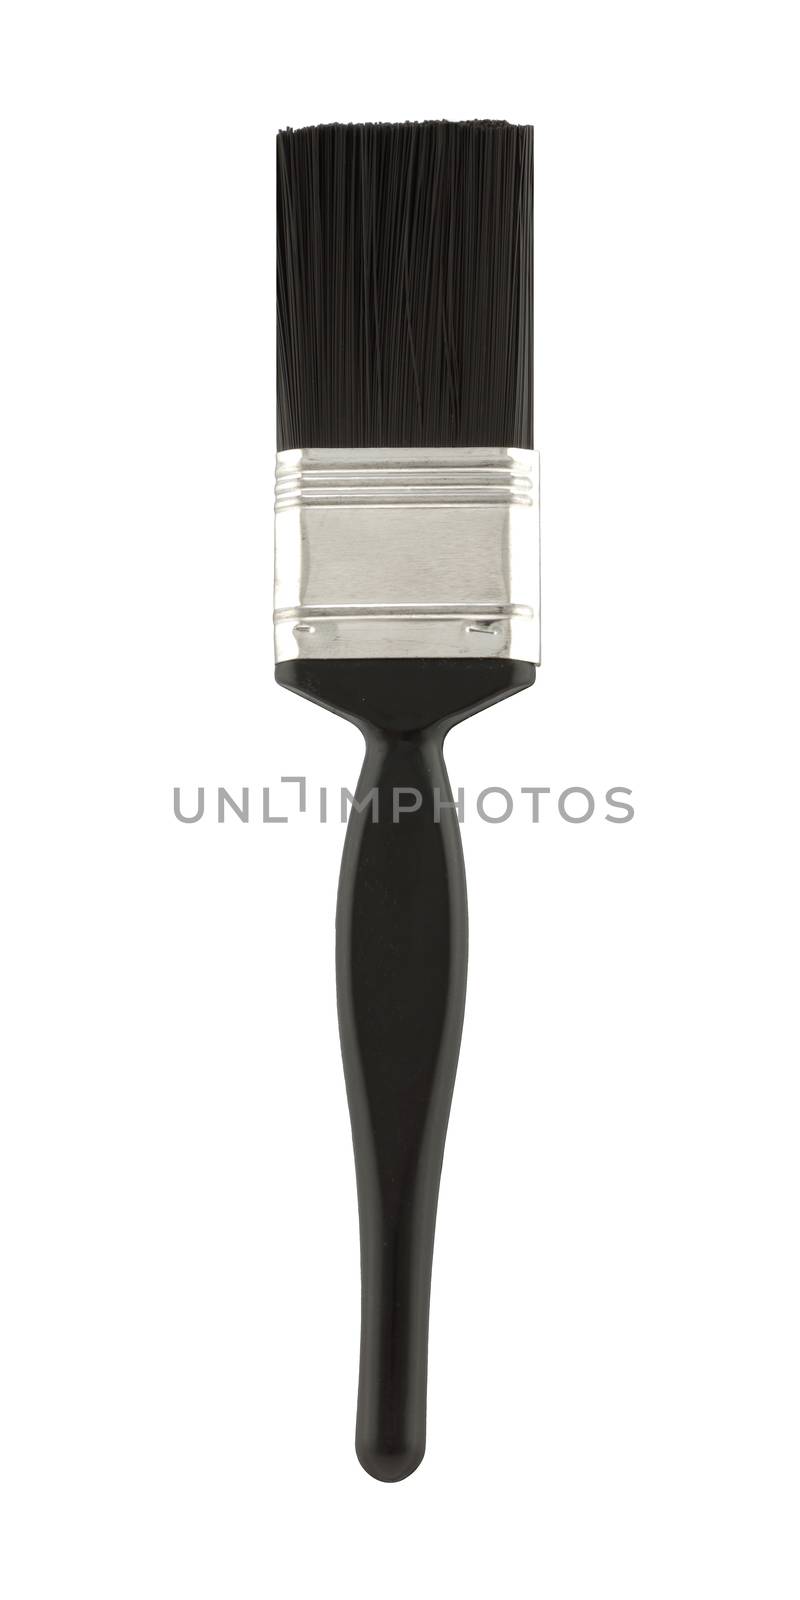 Decorators paint brush isolated on white with clipping path by VivacityImages